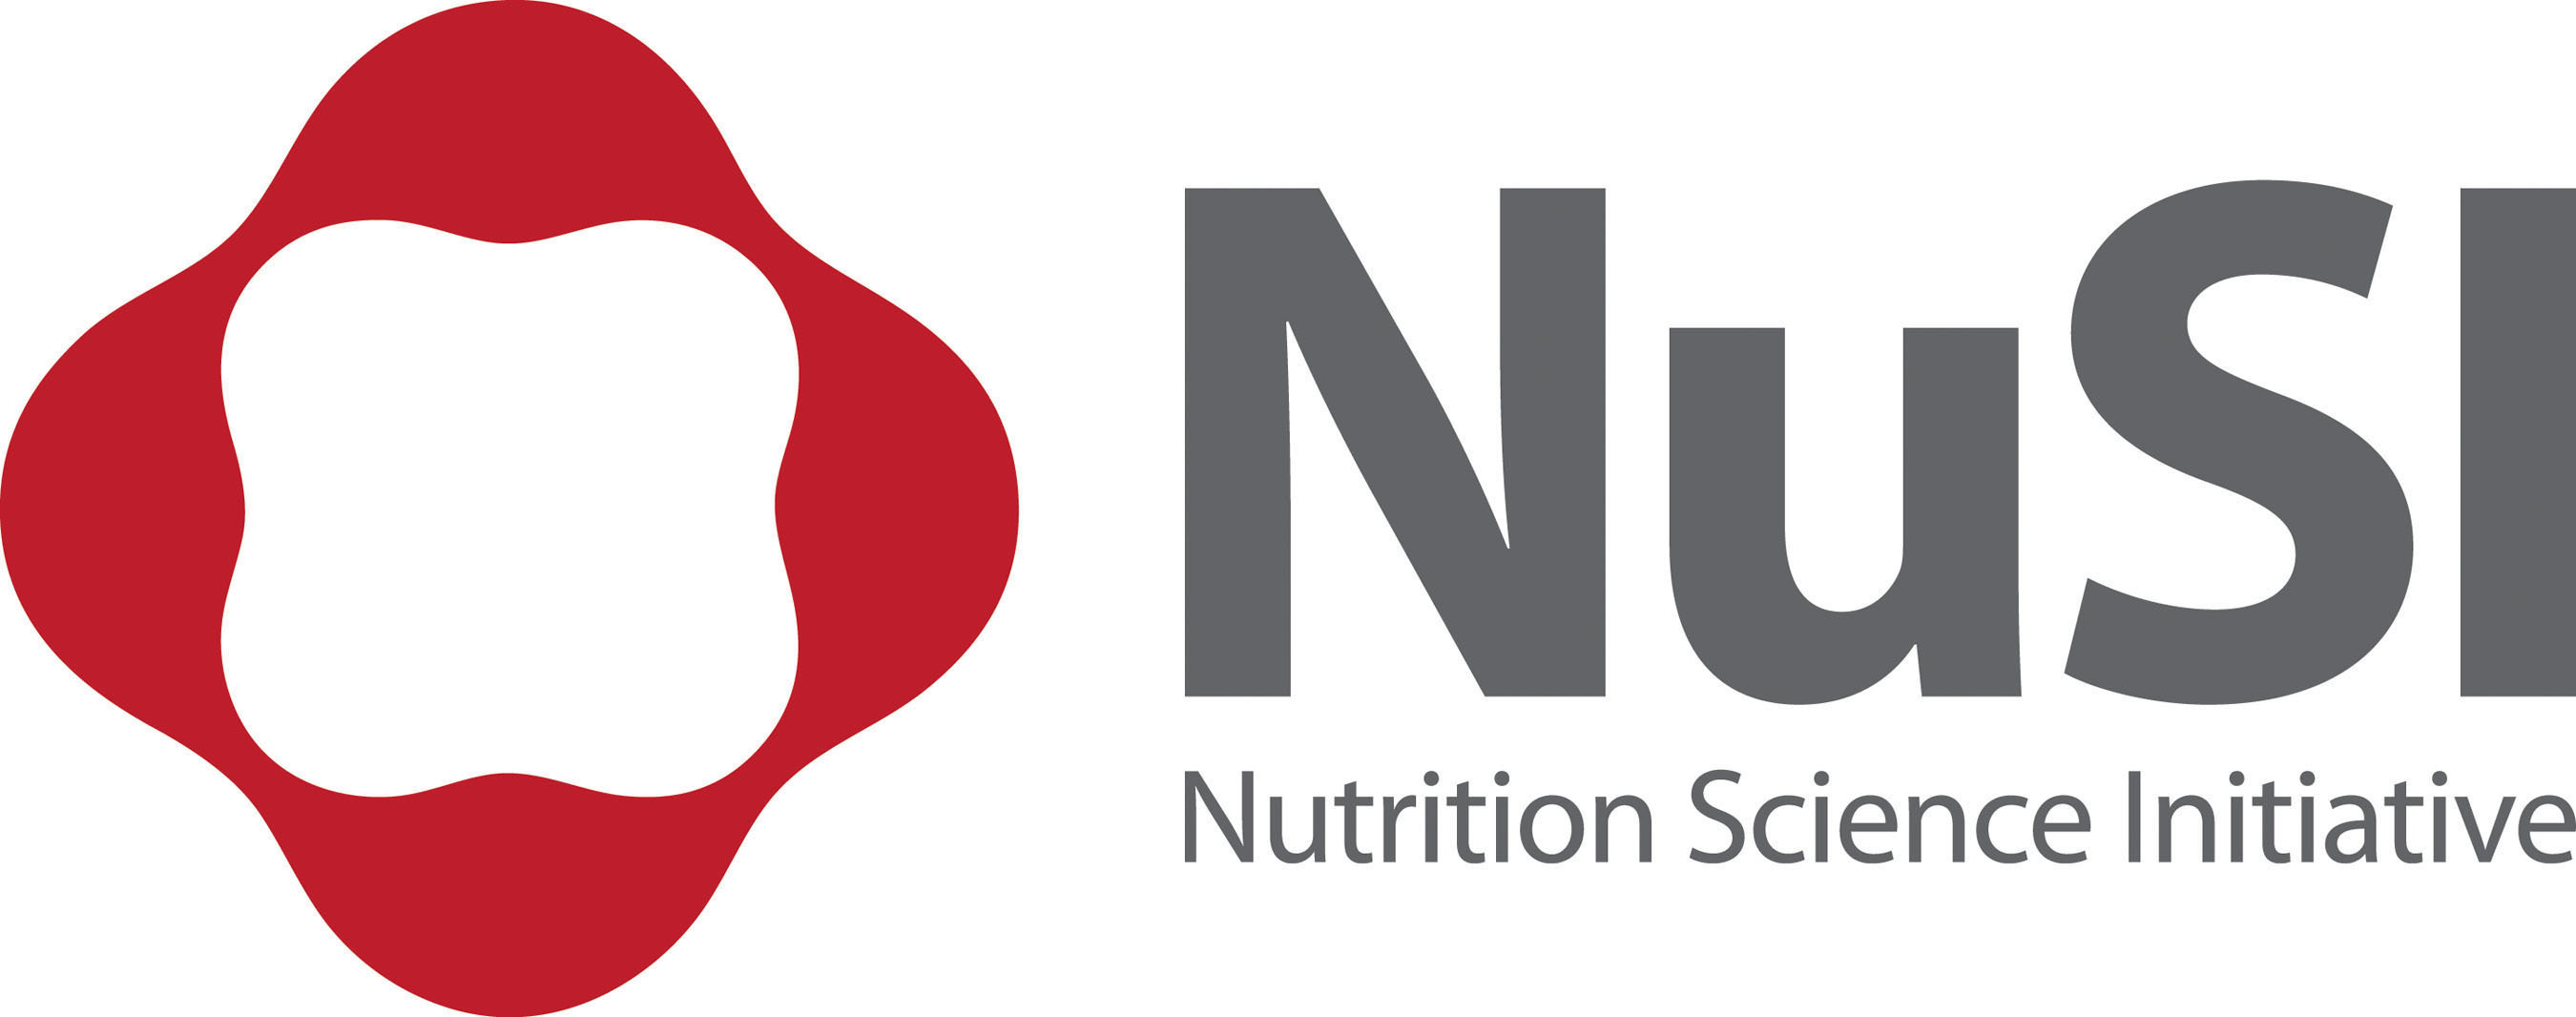 The Nutrition Science Initiative is a non profit organization committed to reducing the economic and social impact of obesity and obesity-related disease. For more information visit www.nusi.org.